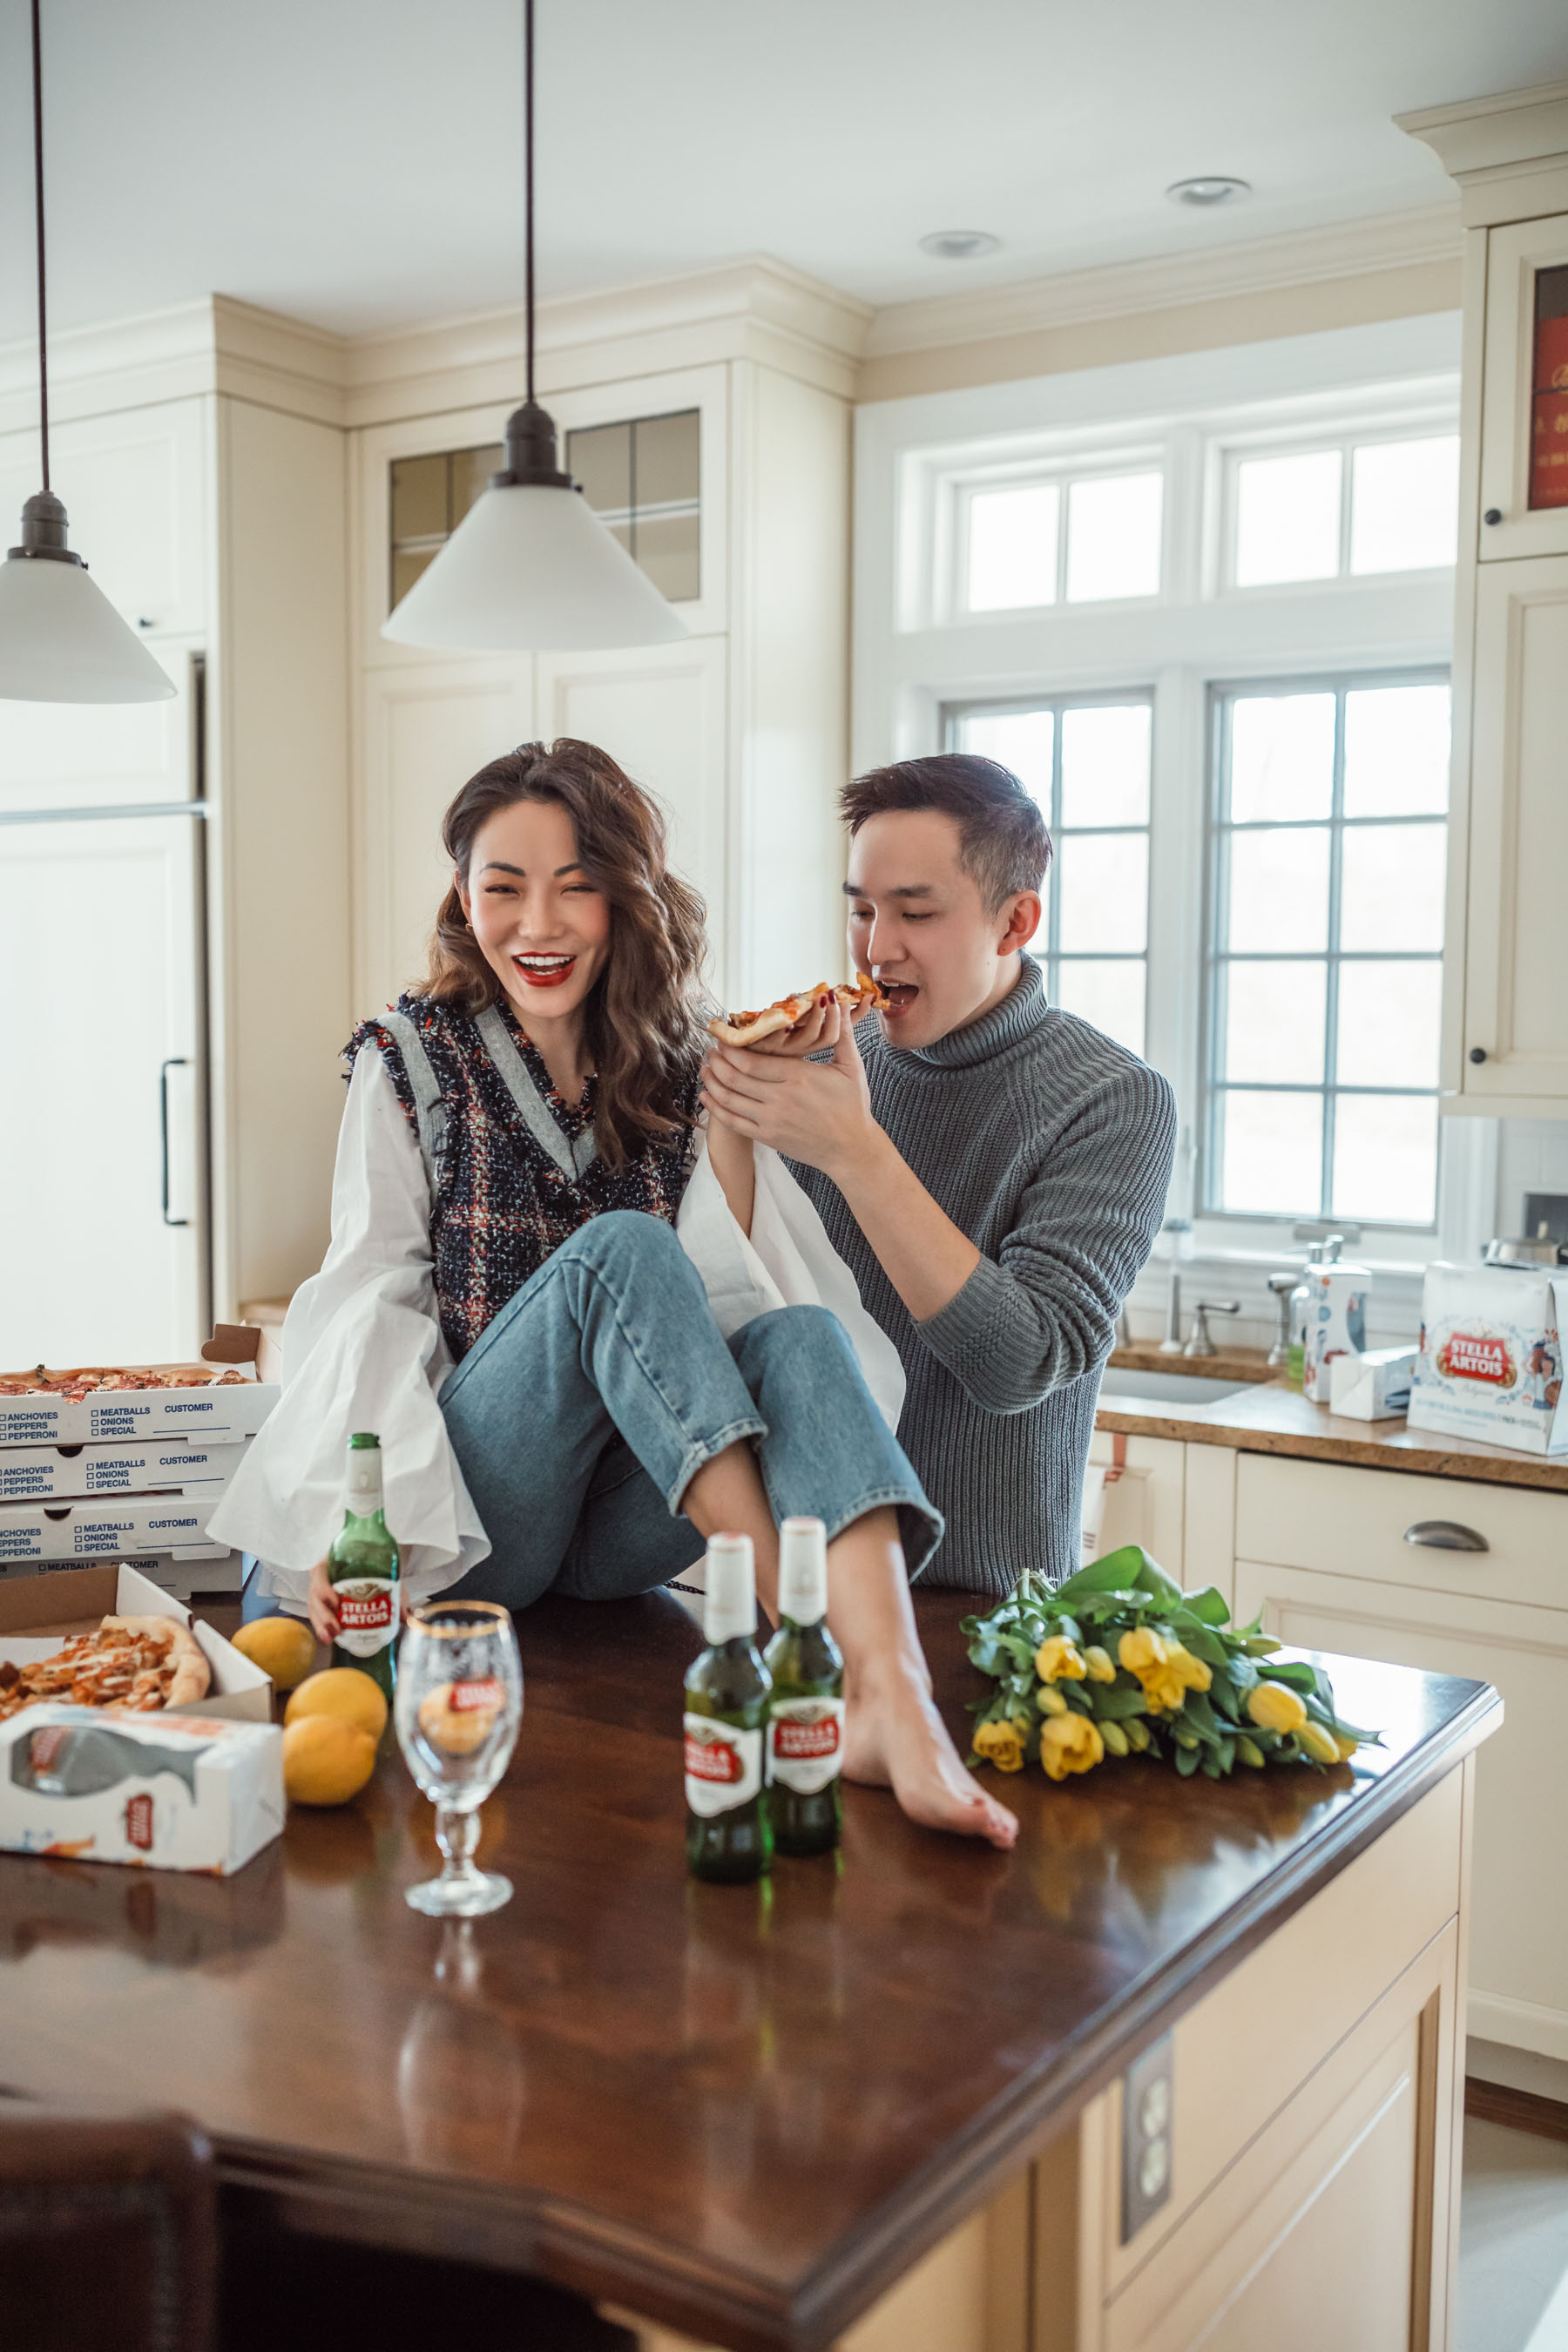 How to Throw a Super Bowl Party That Matters // Notjessfashion // Stella Artois, Super Bowl Party, fashion blogger, new york fashion blogger, jessica wang, pizza and beer